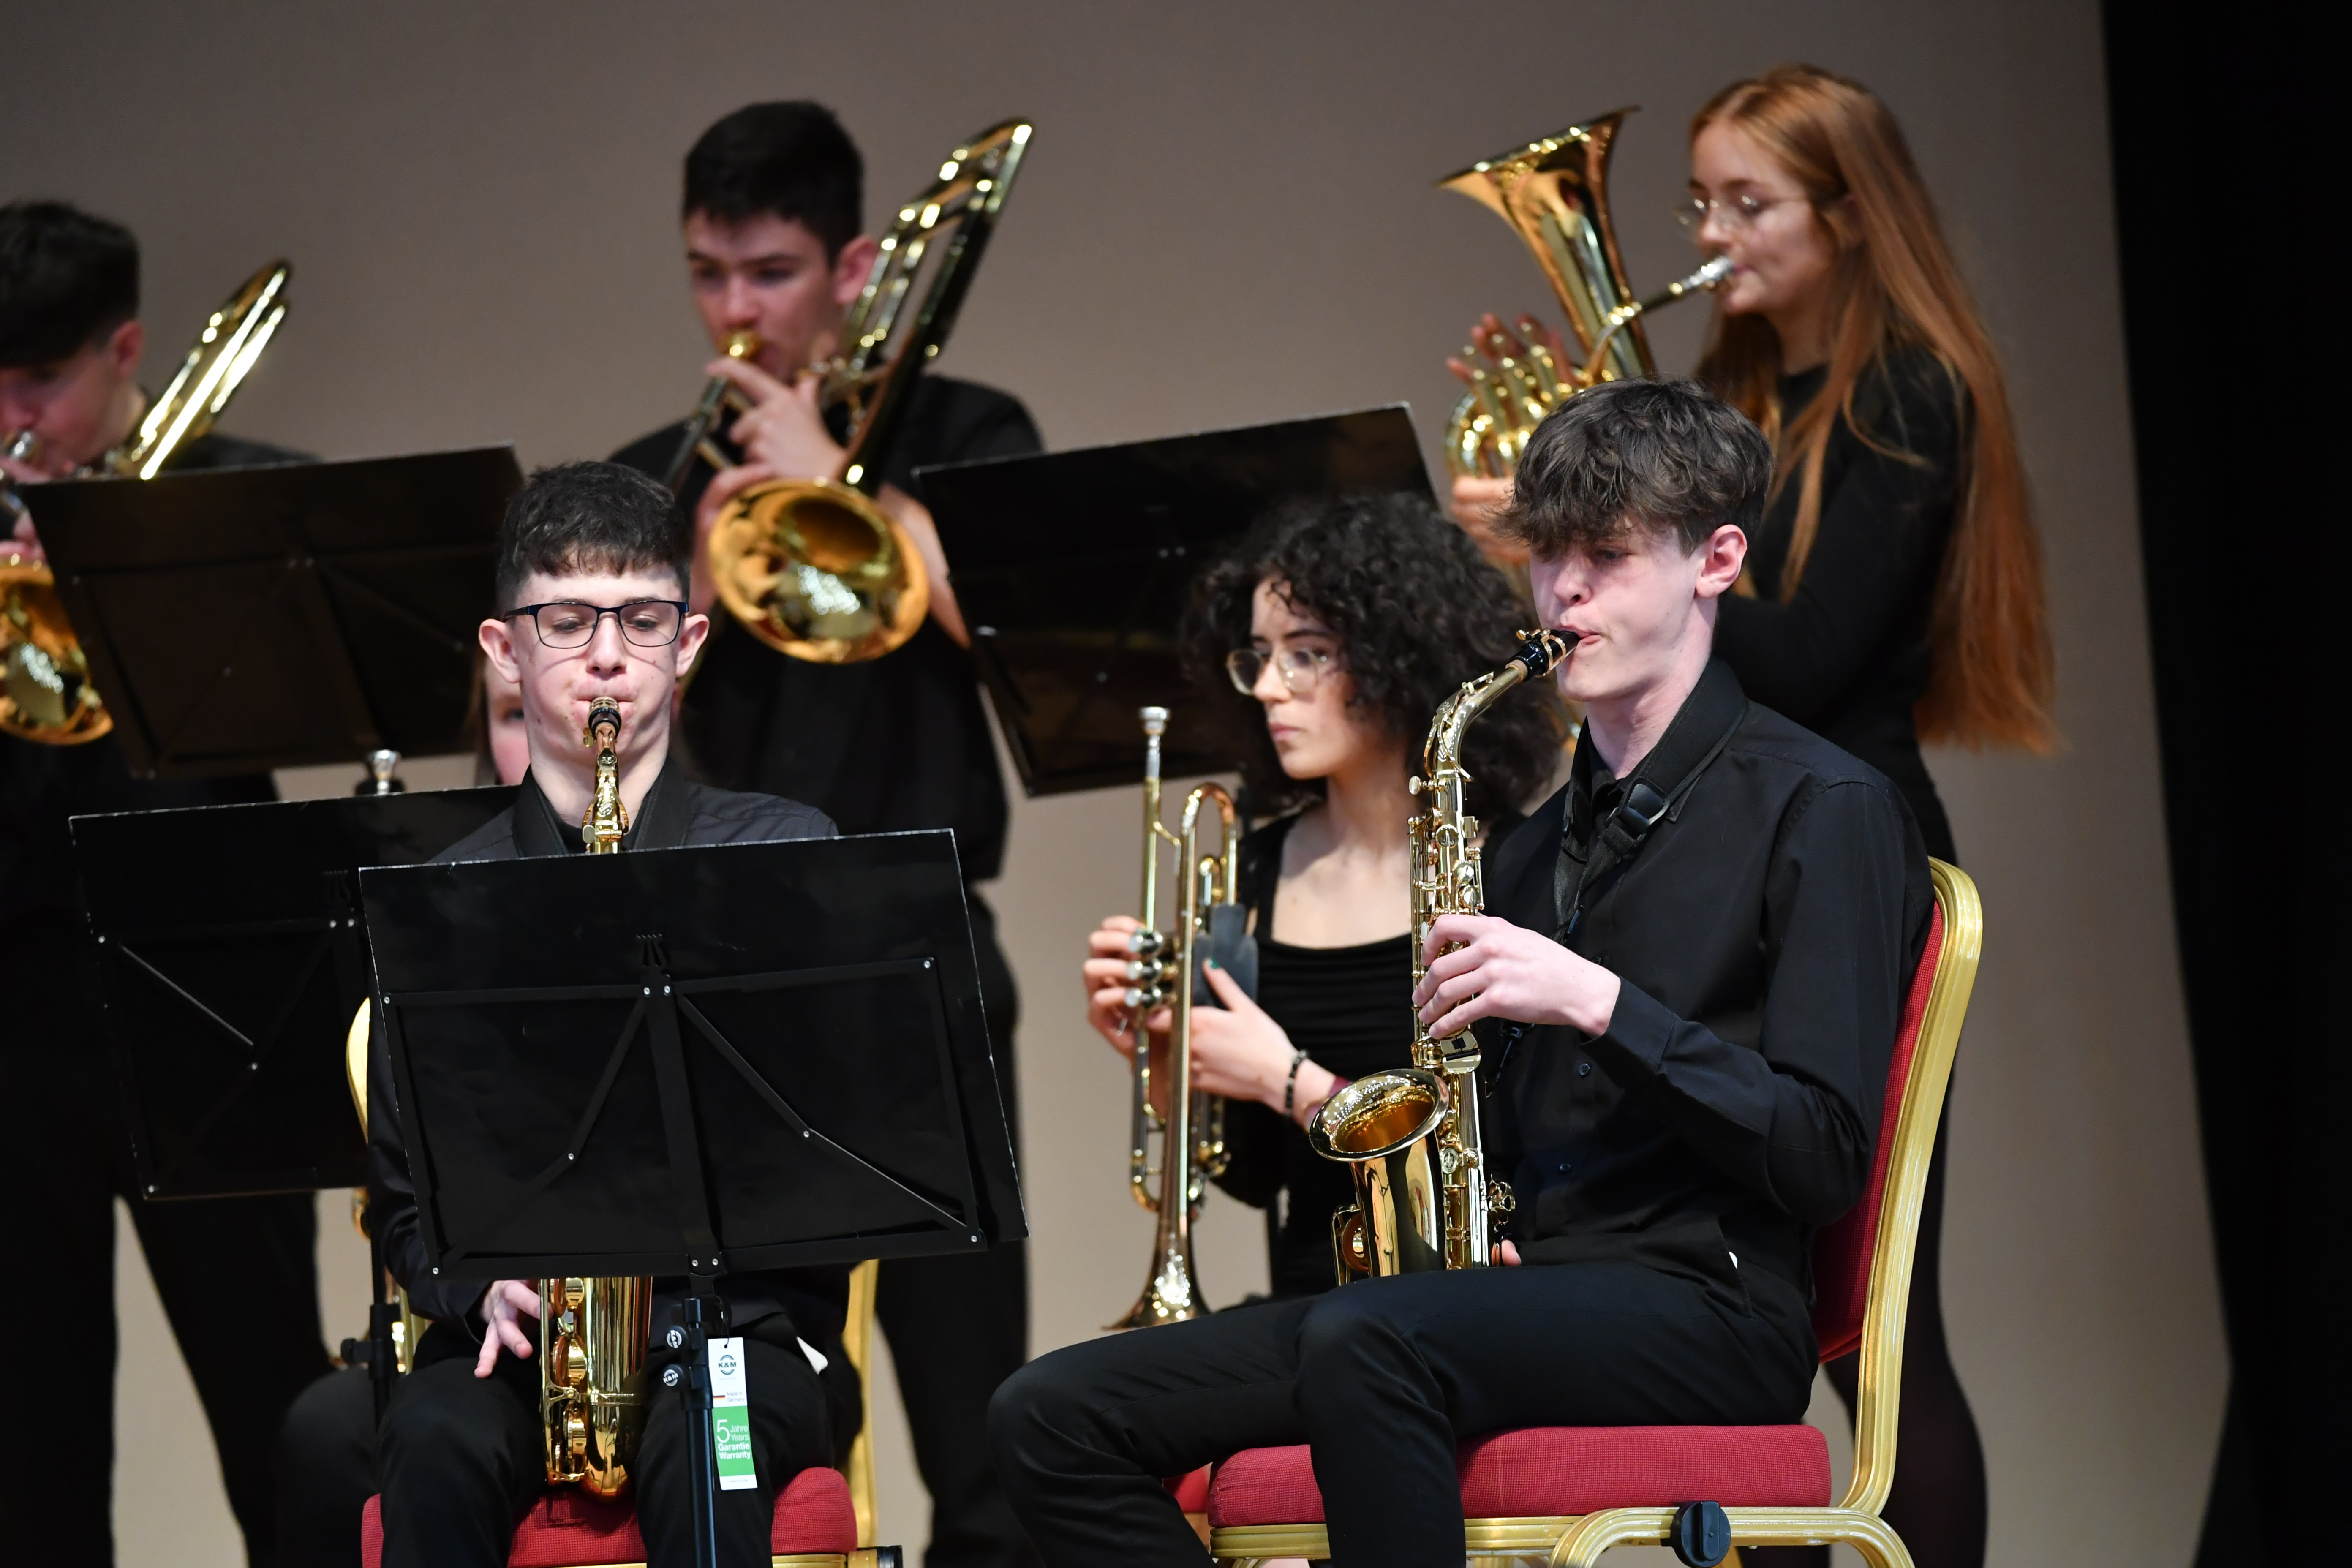 Big Band brass section in concert